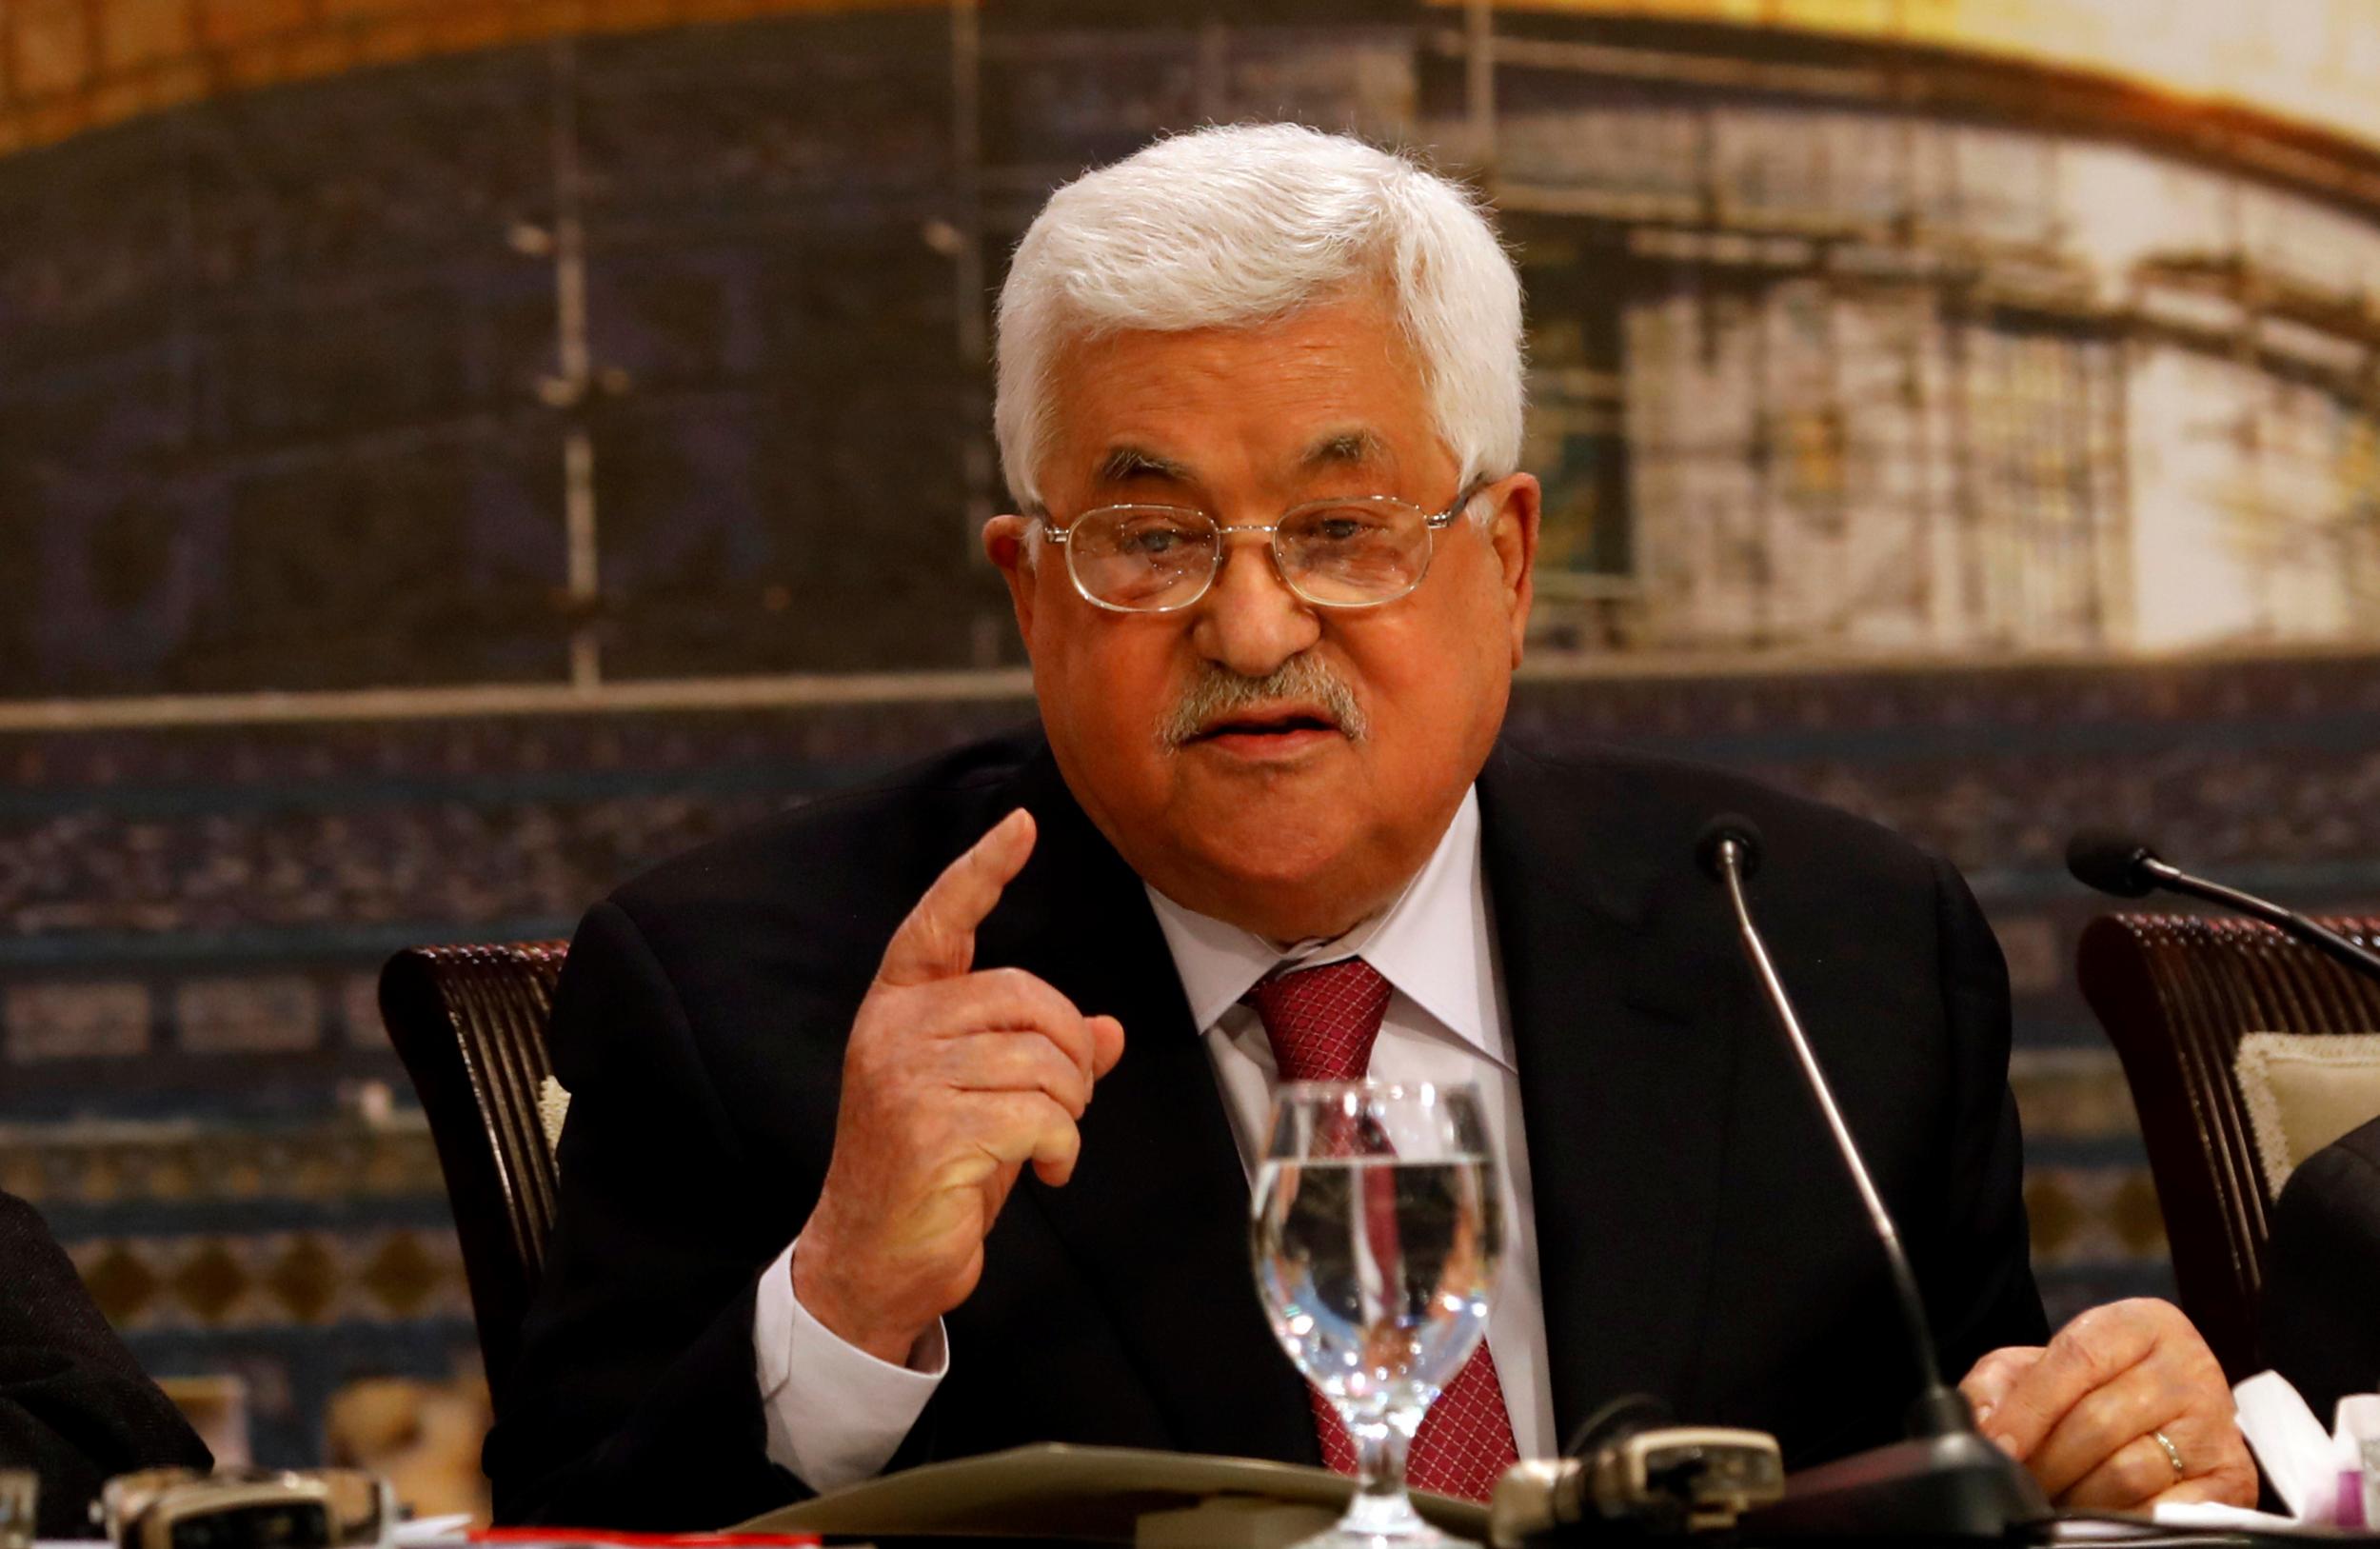 Palestinian President Mahmoud Abbas speaks during a Palestinian National Council meeting in Ramallah in the occupied West Bank on 30 April 2018